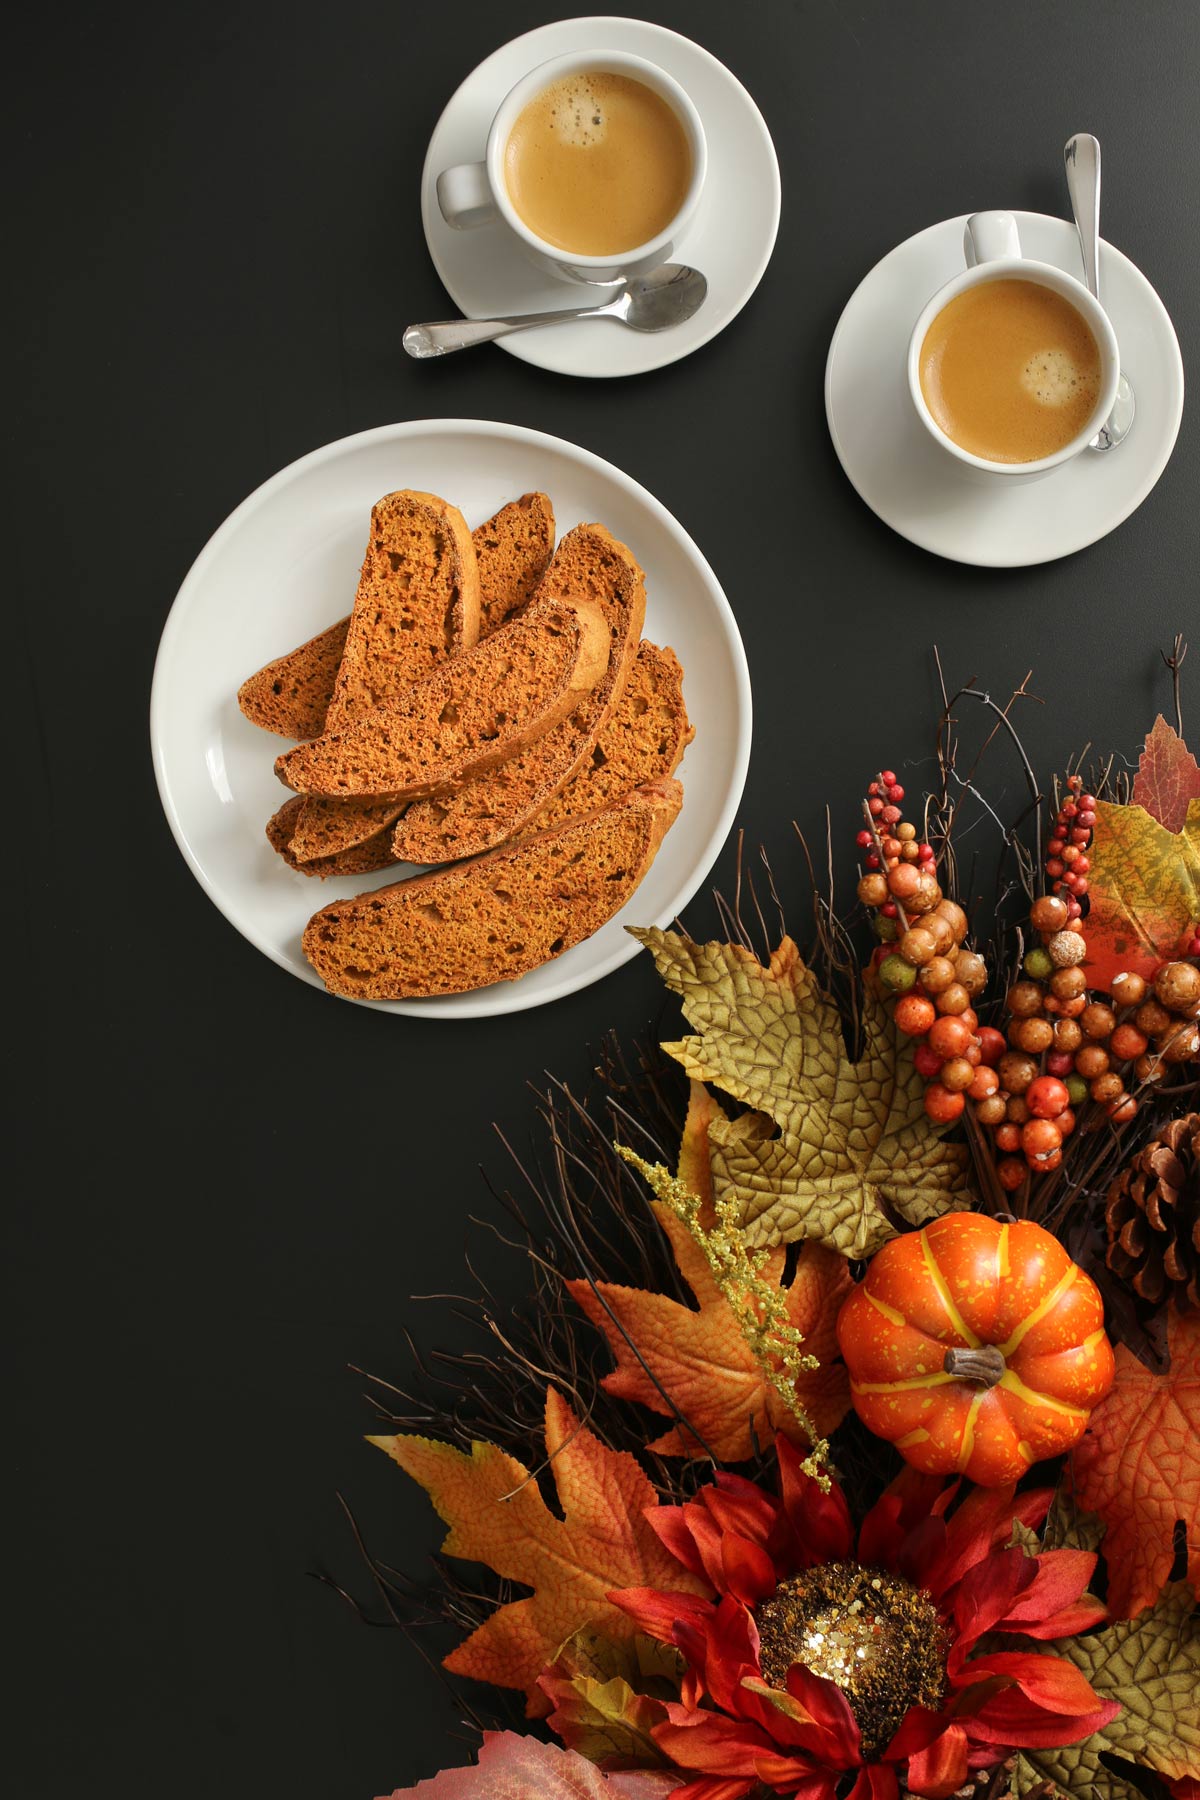 cups of espresso on saucers next to platter of biscotti framed by pumpkin decor and fall leaves.